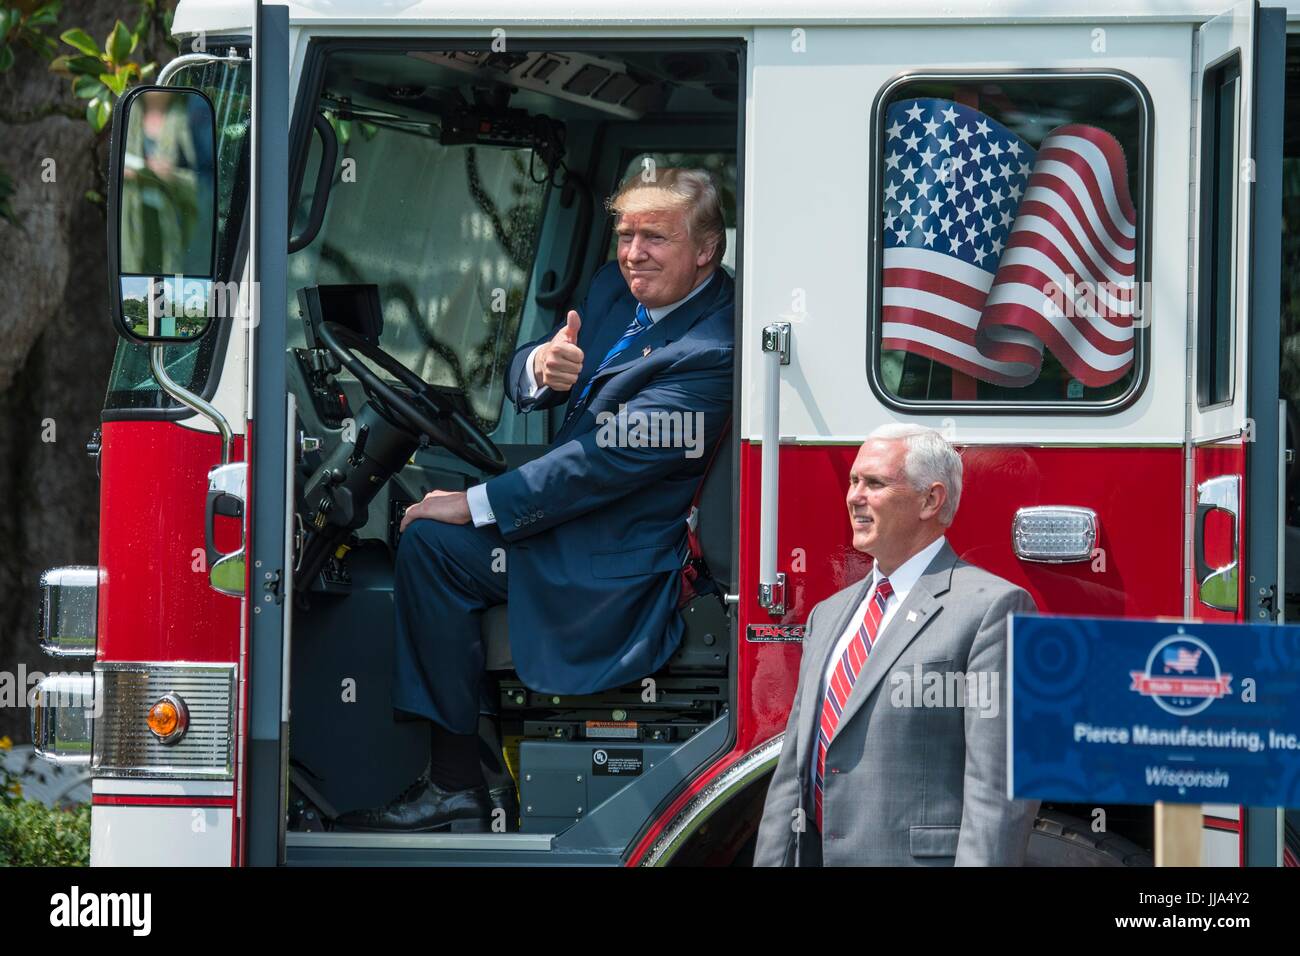 Washington, United States Of America. 17th July, 2017. U.S President Donald Trump gives a thumbs up while sitting behind the wheel of a Pierce fire truck as Vice President Mike Pence looks on during the Made in America Product Showcase on the South Lawn of the White House July 17, 2017 in Washington, DC. Credit: Planetpix/Alamy Live News Stock Photo